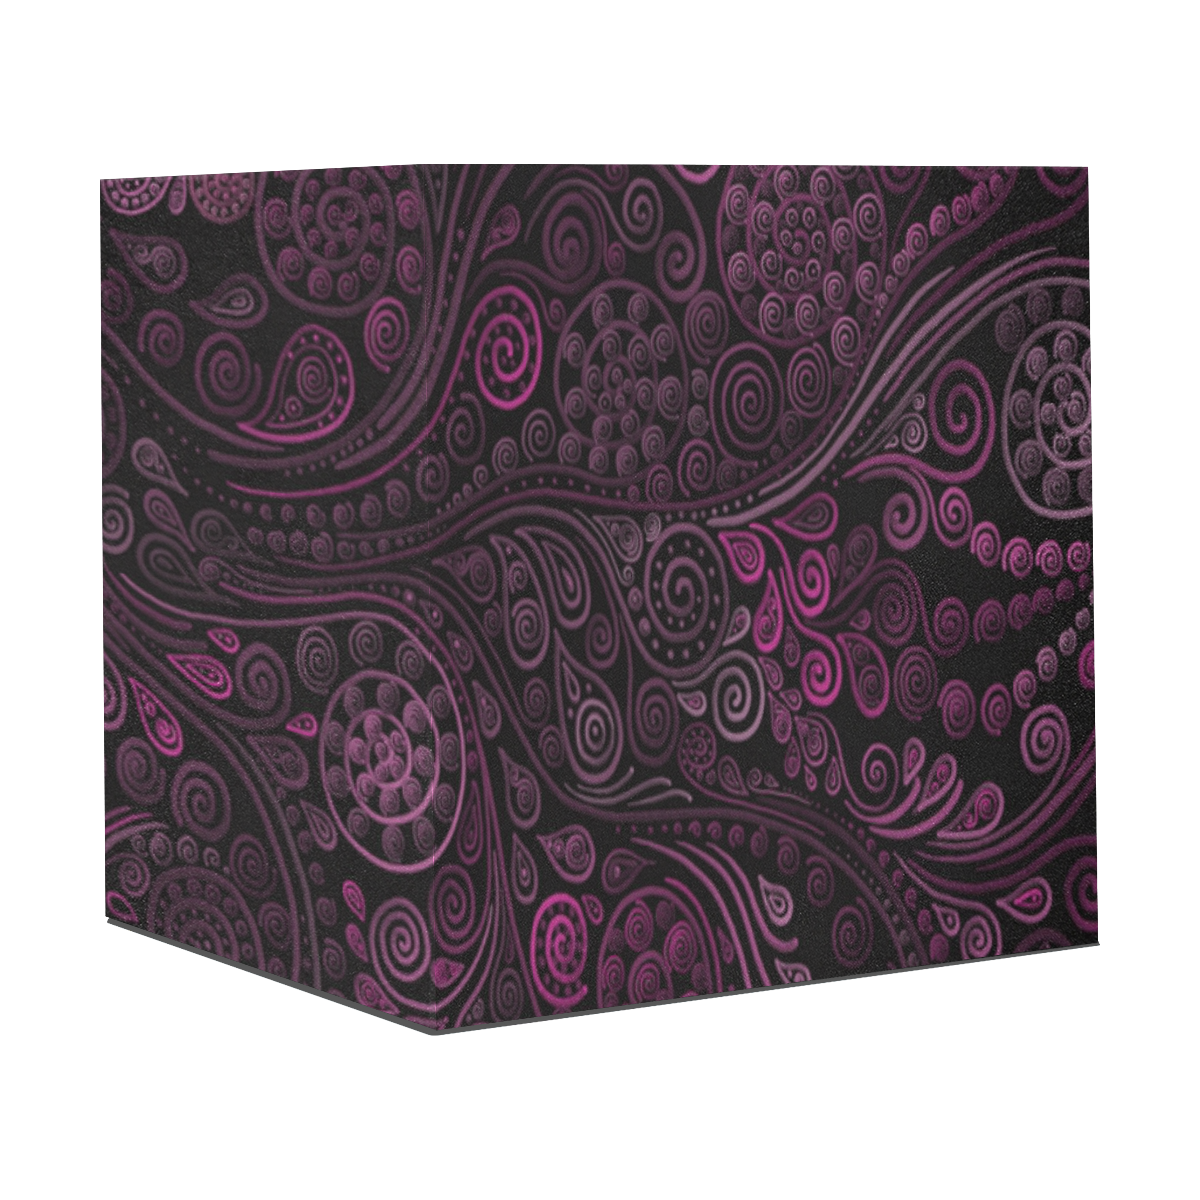 3D psychedelic ornaments, magenta Gift Wrapping Paper 58"x 23" (5 Rolls)